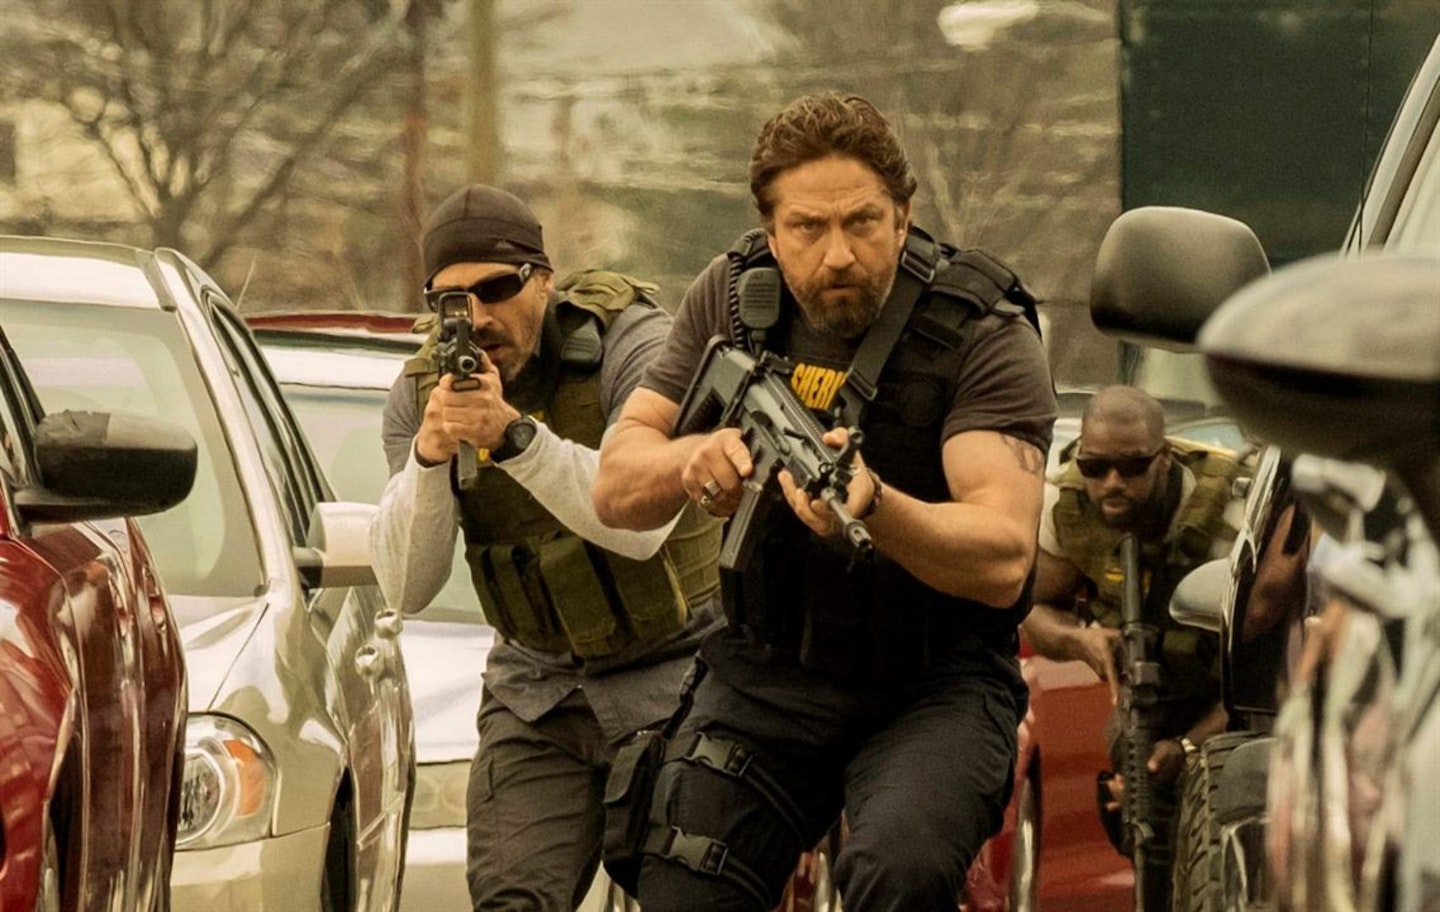 Den Of Thieves Review | Movie - Empire